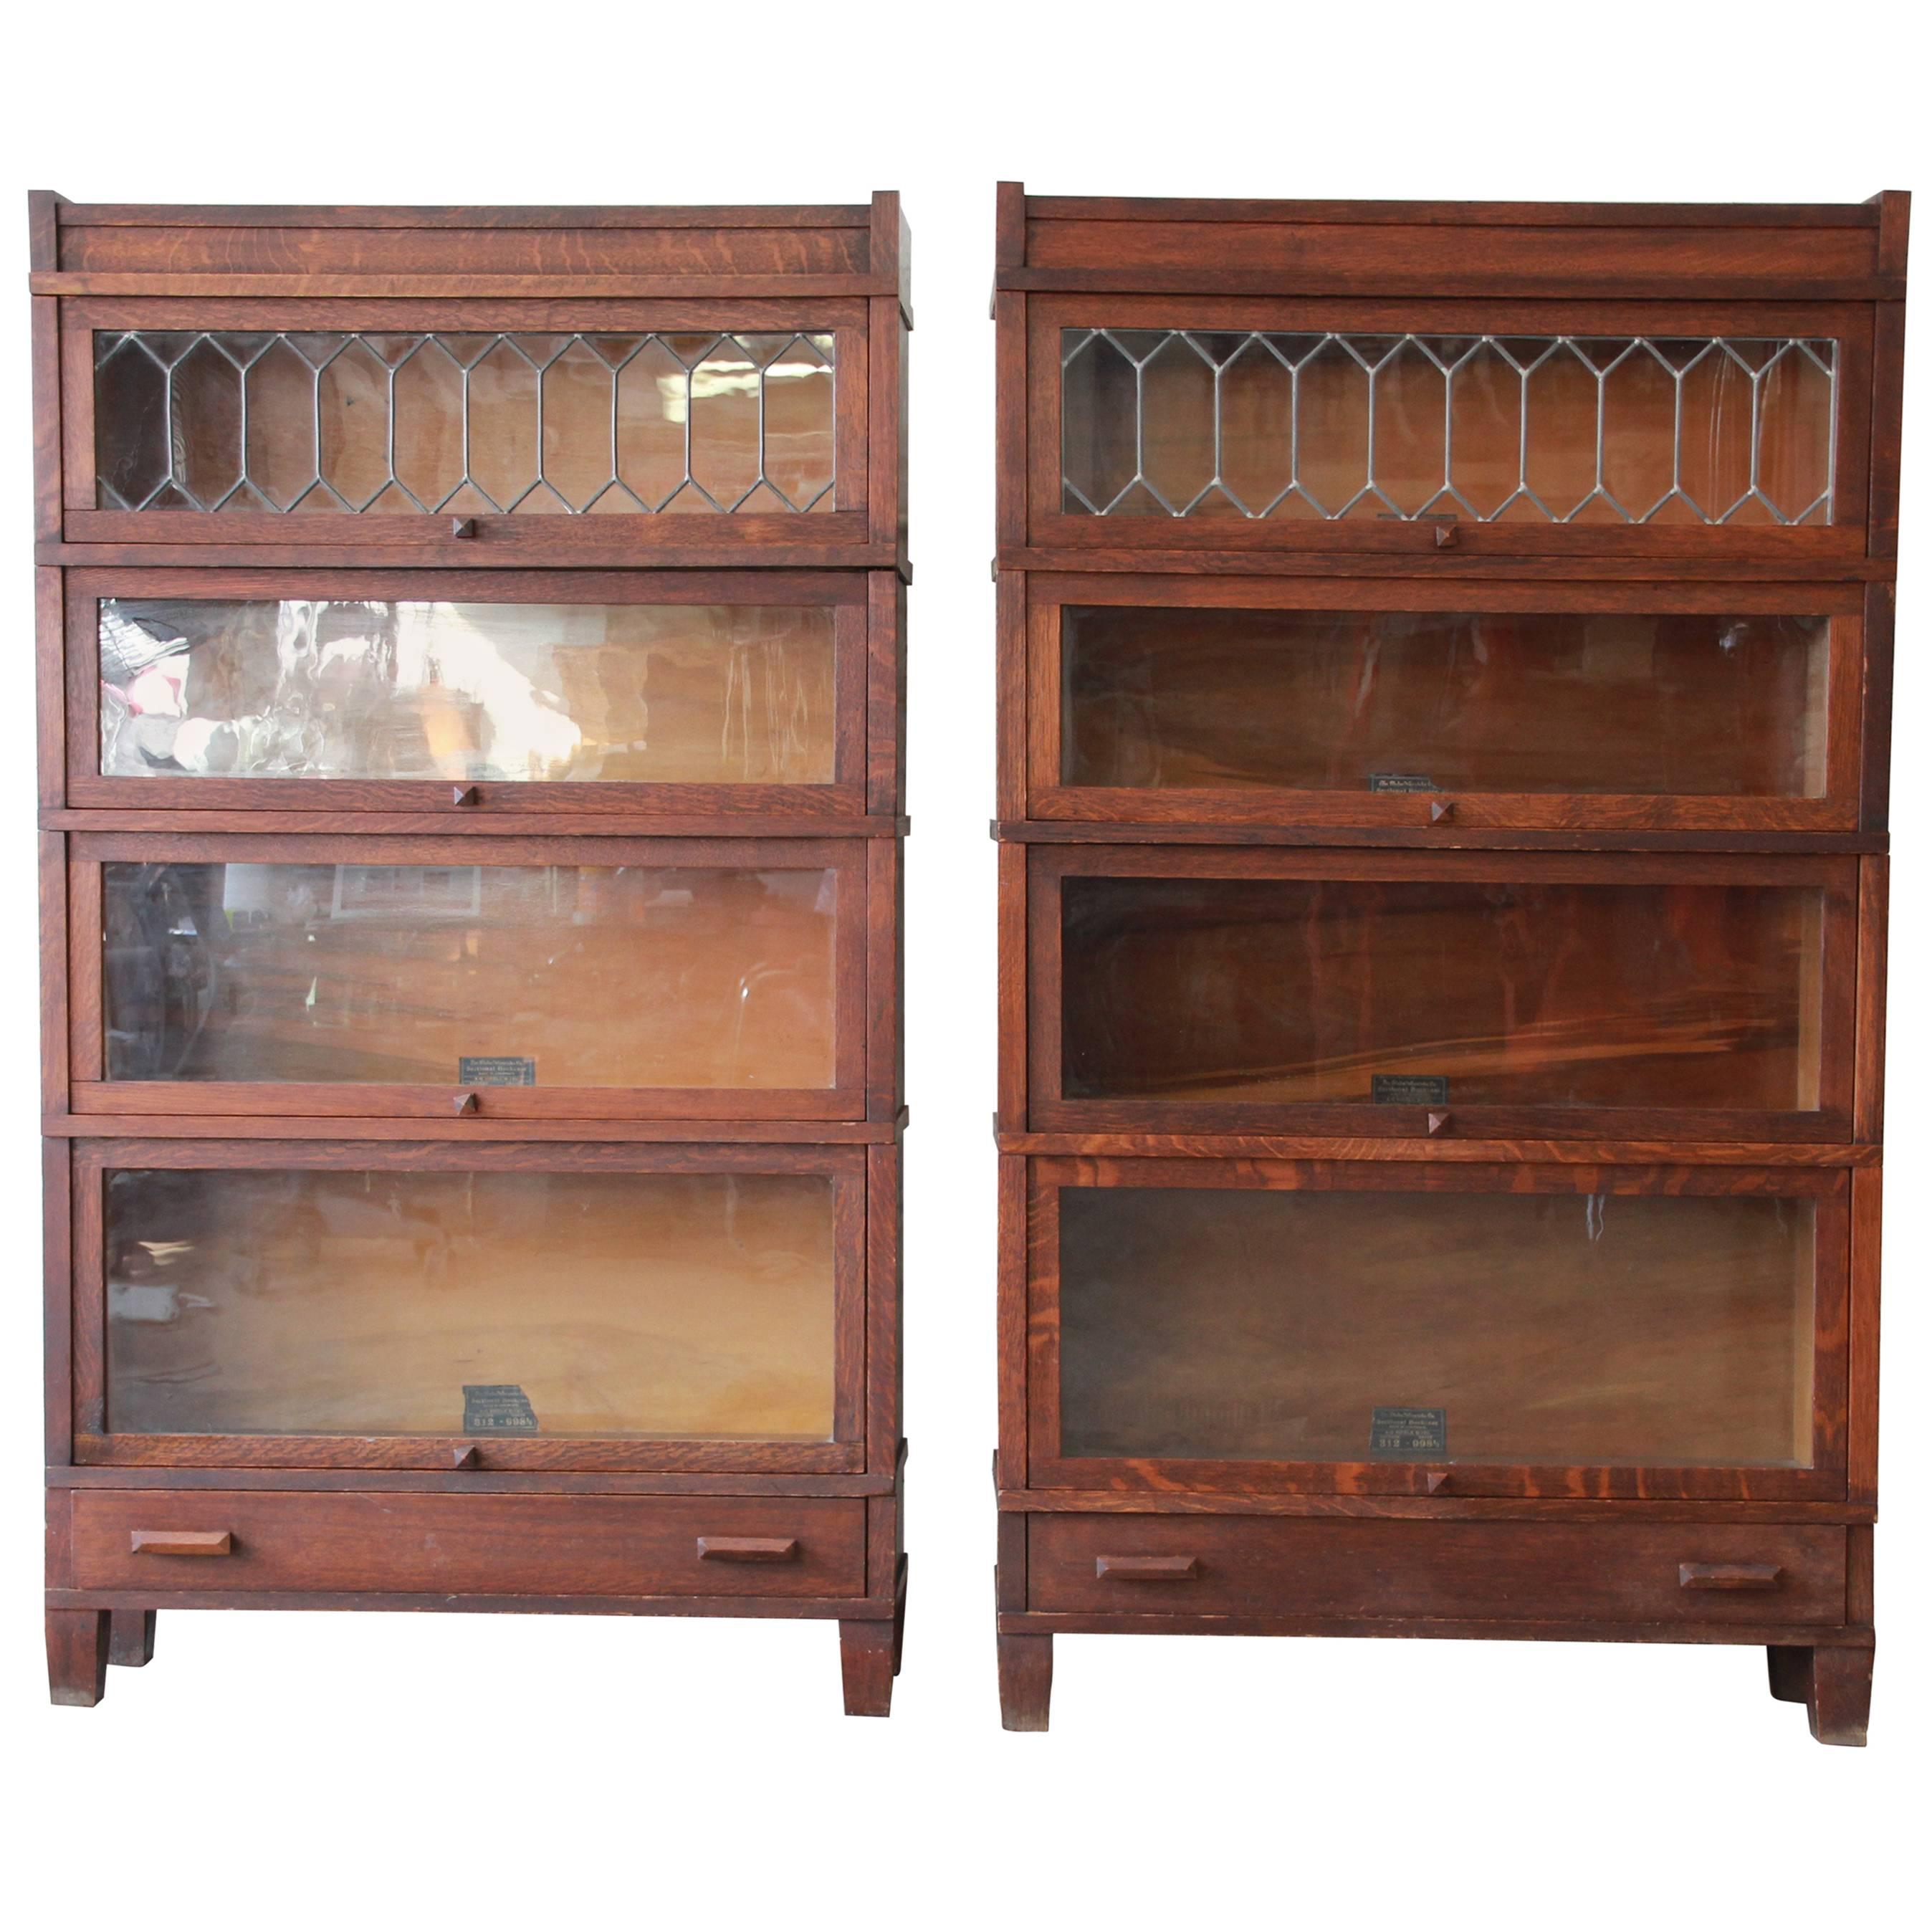 Antique Oak Barrister Bookcases with Leaded Glass Doors by Globe-Wernicke, Pair